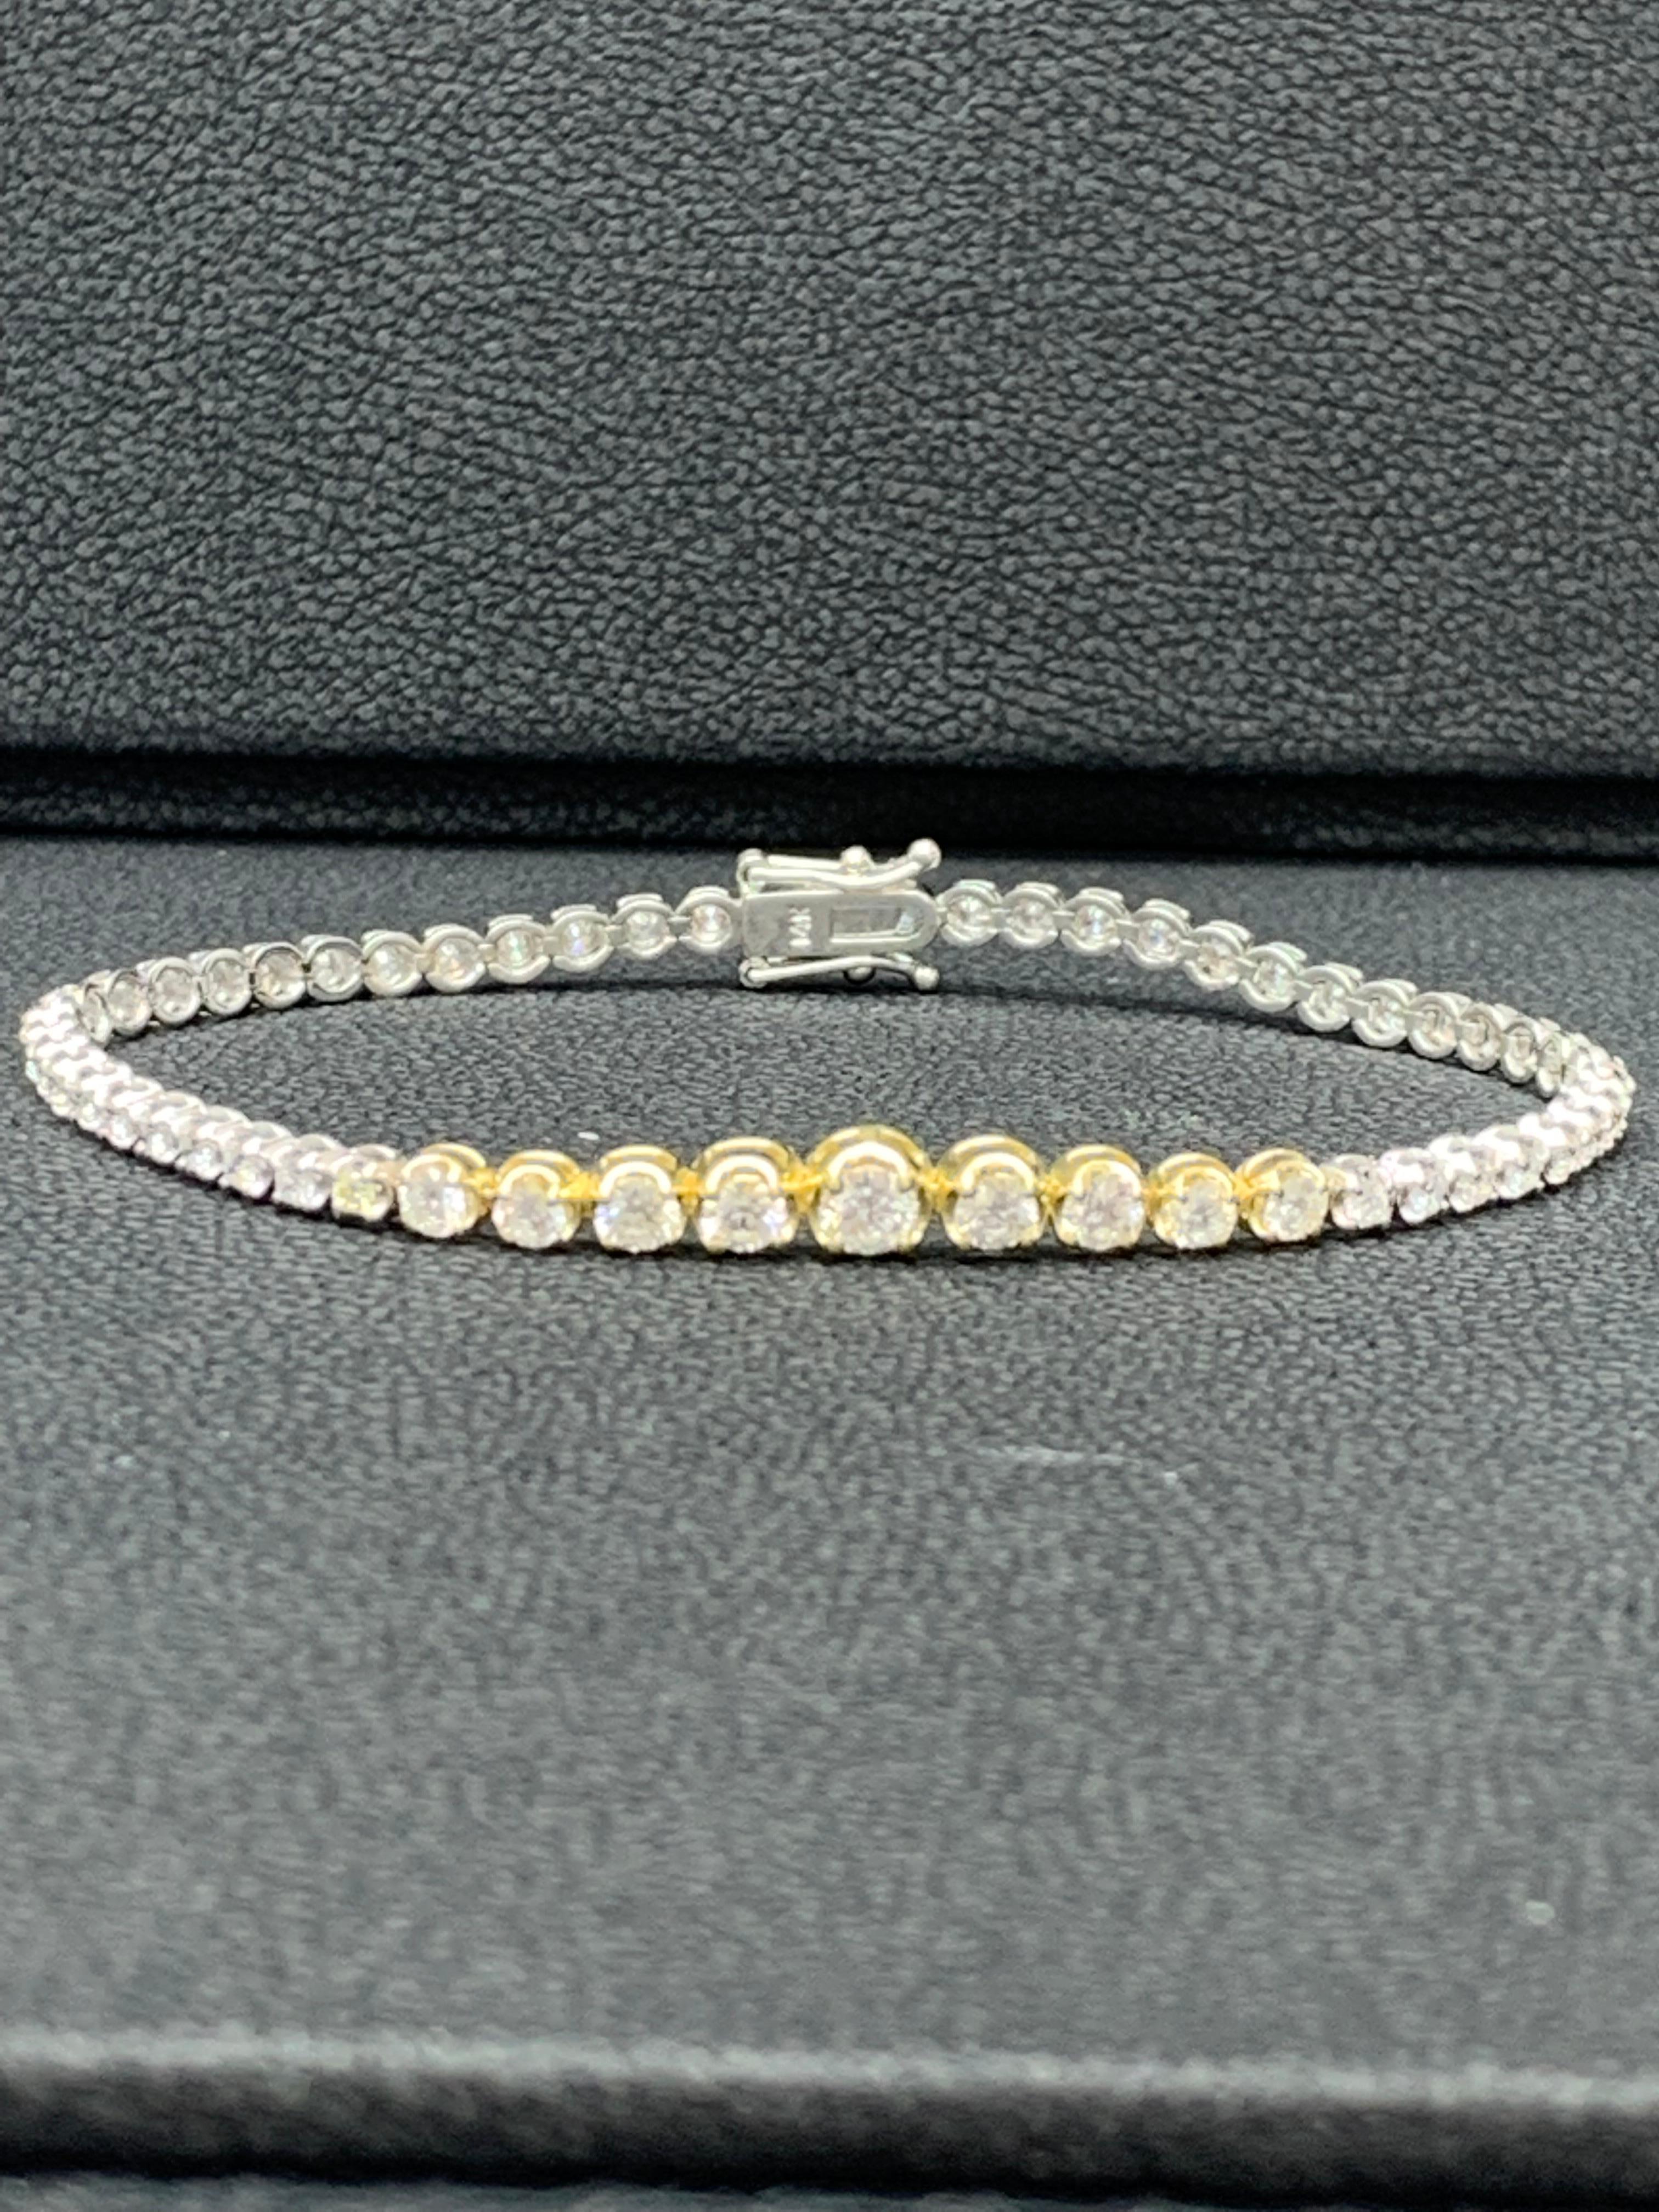 An absolutely stunning tennis bracelet that will catch everyone's attention. Features an outstanding 2.25 carats of 55 brilliant round cut diamonds. The diamonds shine brilliantly in their 14k white and yellow gold mounting.

All diamonds are GH